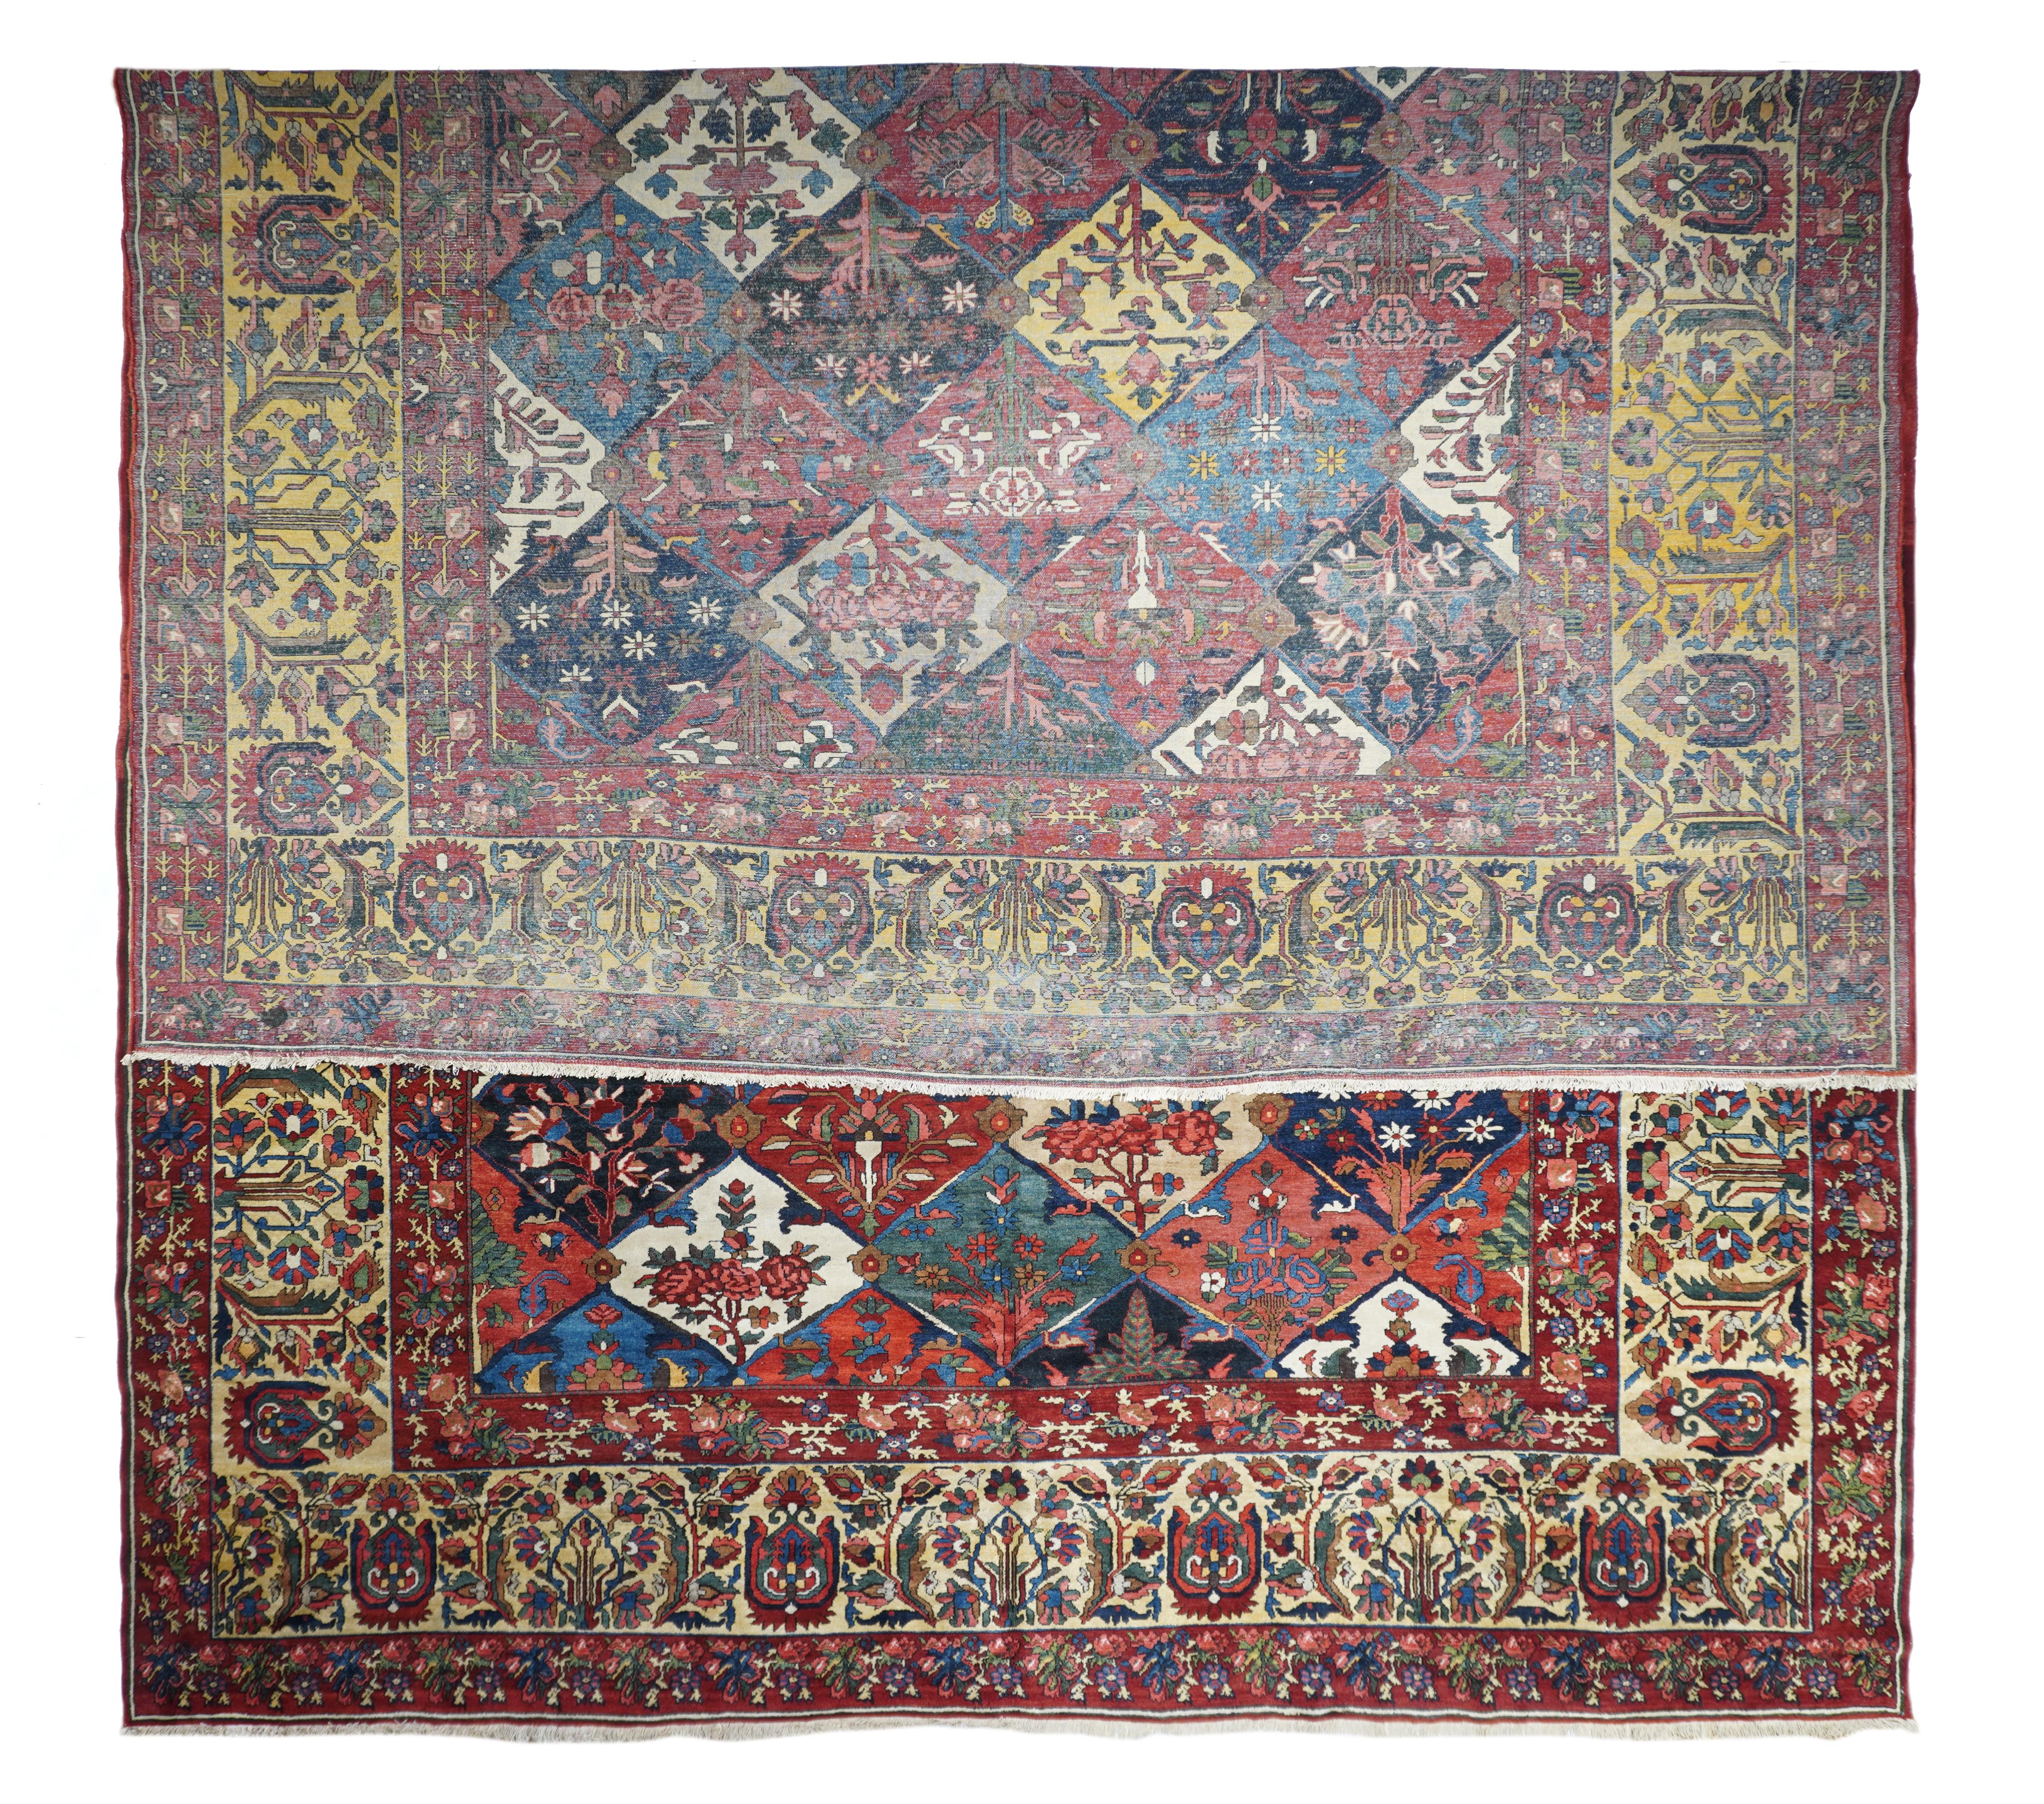 This central Persian Char Mahal district village scatter shows a scaliform escutcheon pattern in ecru, red, navy medium blue, straw, rust and blue-green, with standing complete flowers or escutcheons with “fish” leaf supporters enclosed therein.